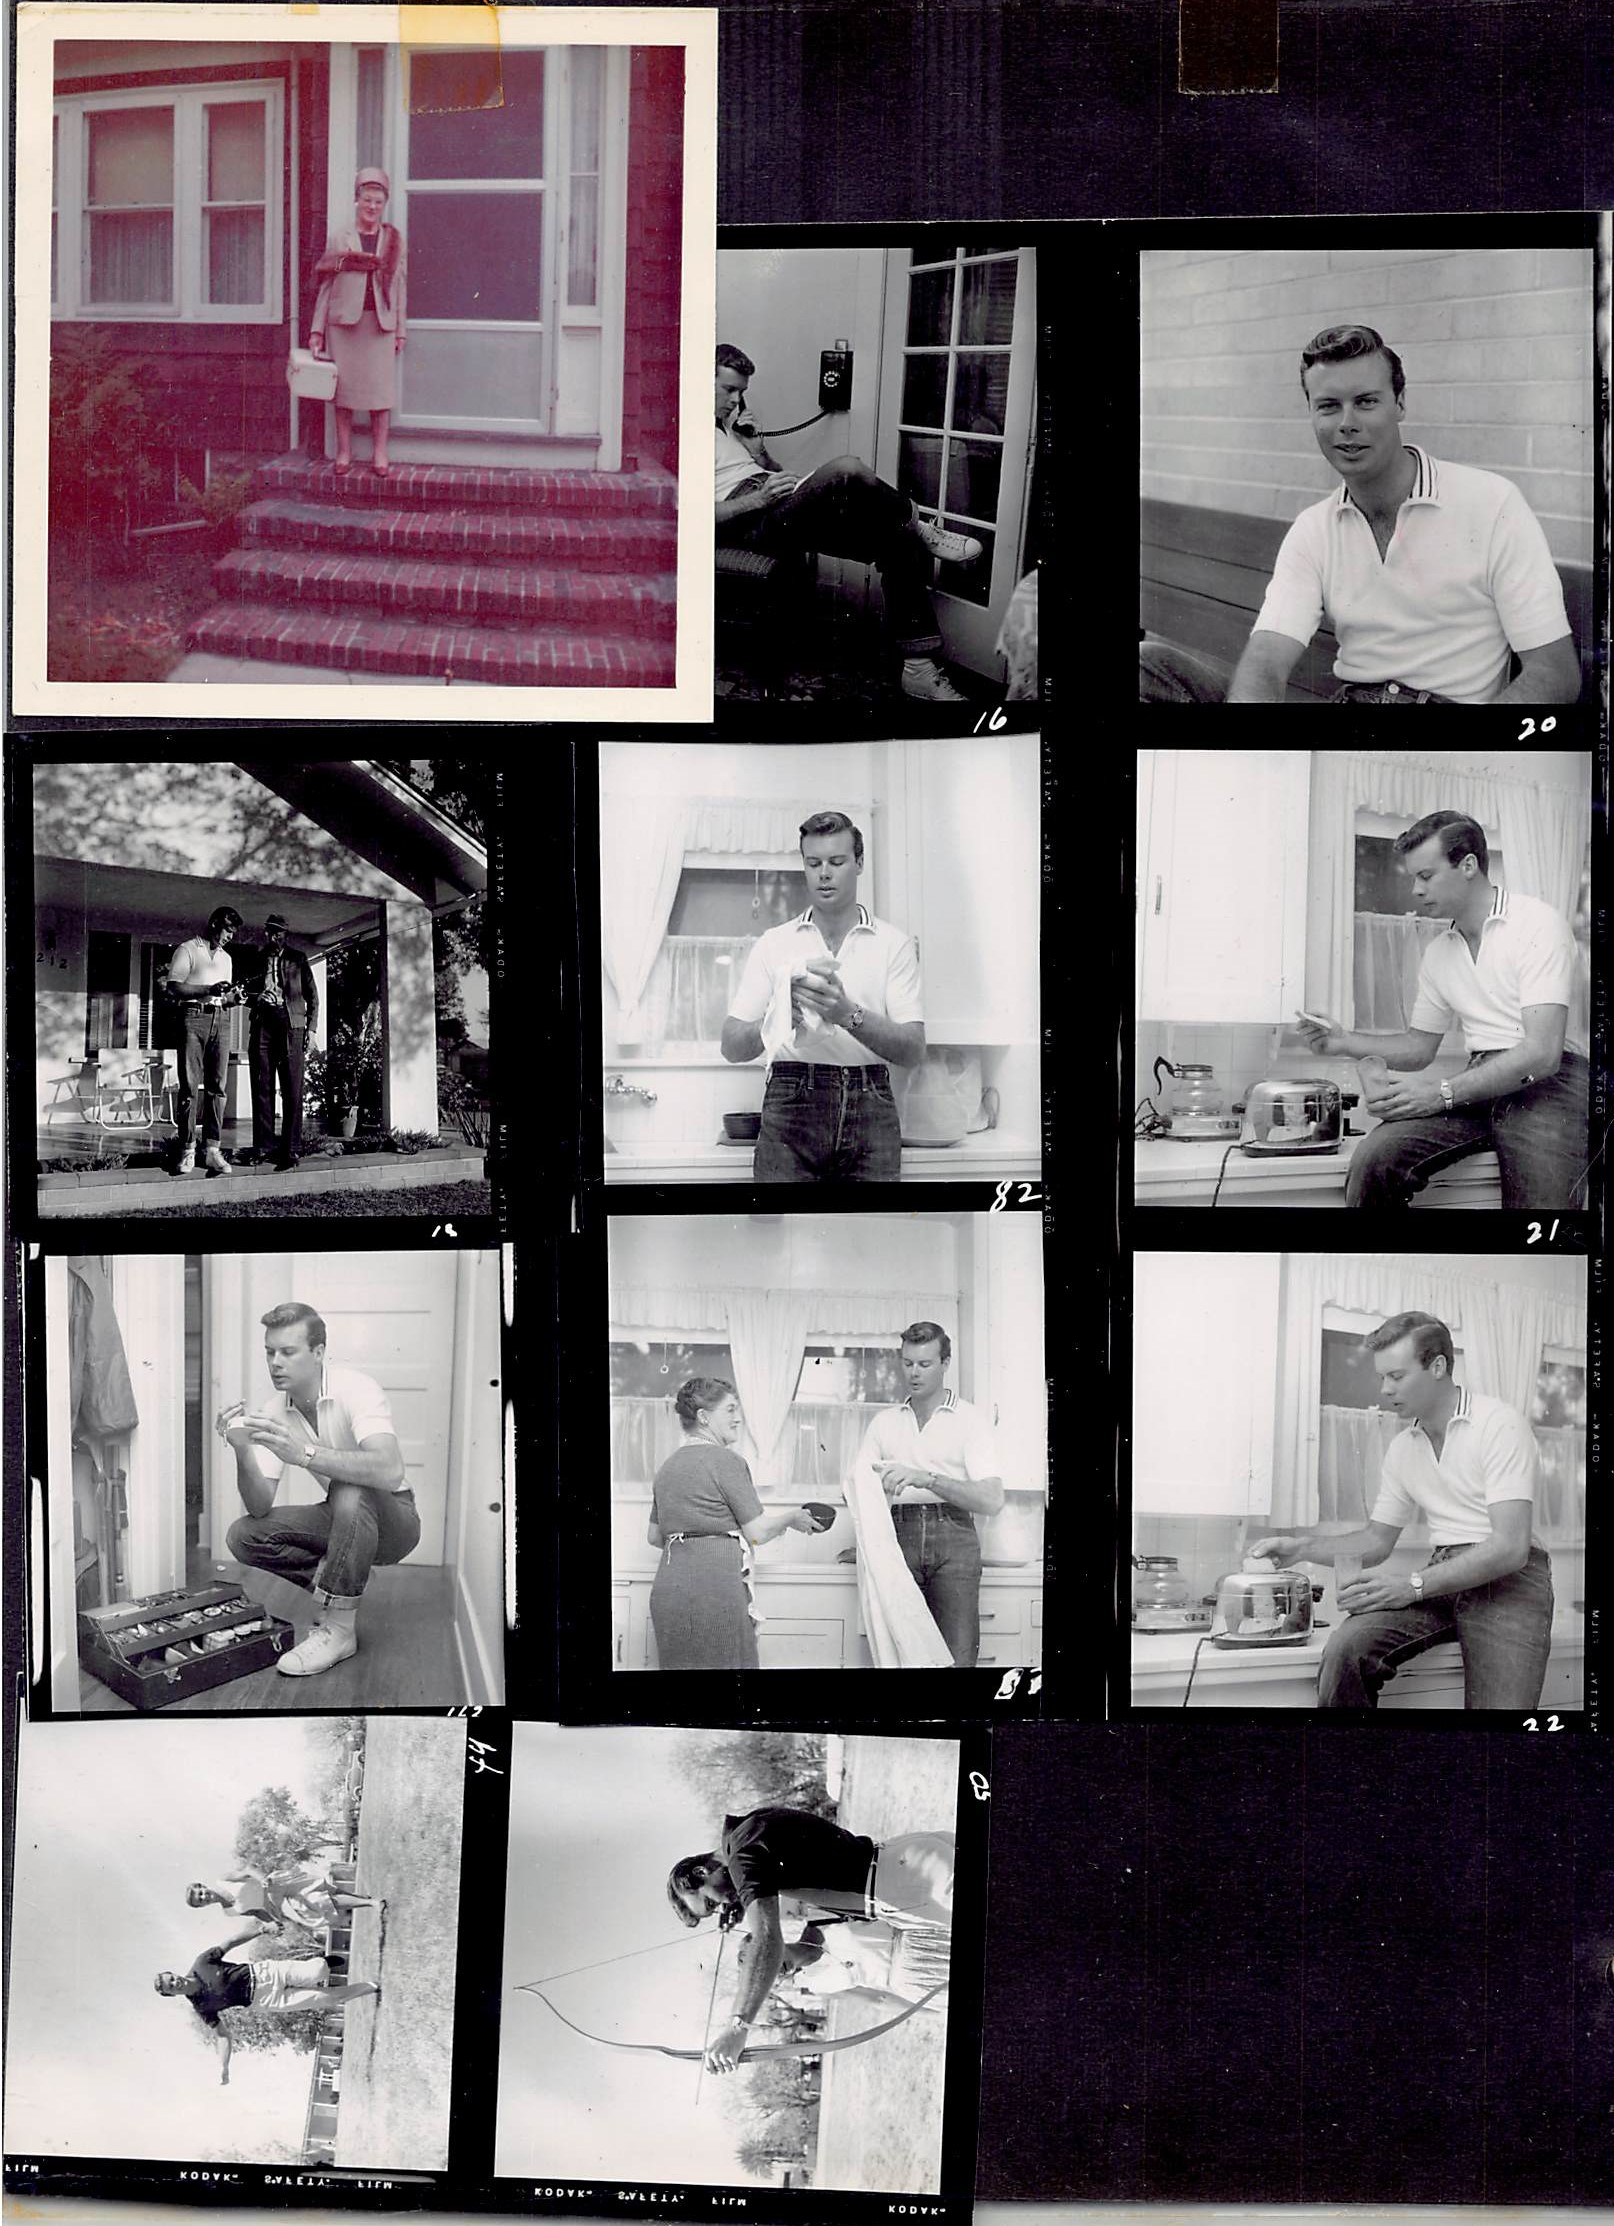  Contact sheet of photos made at 212, c. Jan. 1955. A few, including the color photo of Bob’s mother, were not taken at that time. That candid photo was made a number of years later and not at 212. Photos of Bob with a bow and arrow and an unidentifi